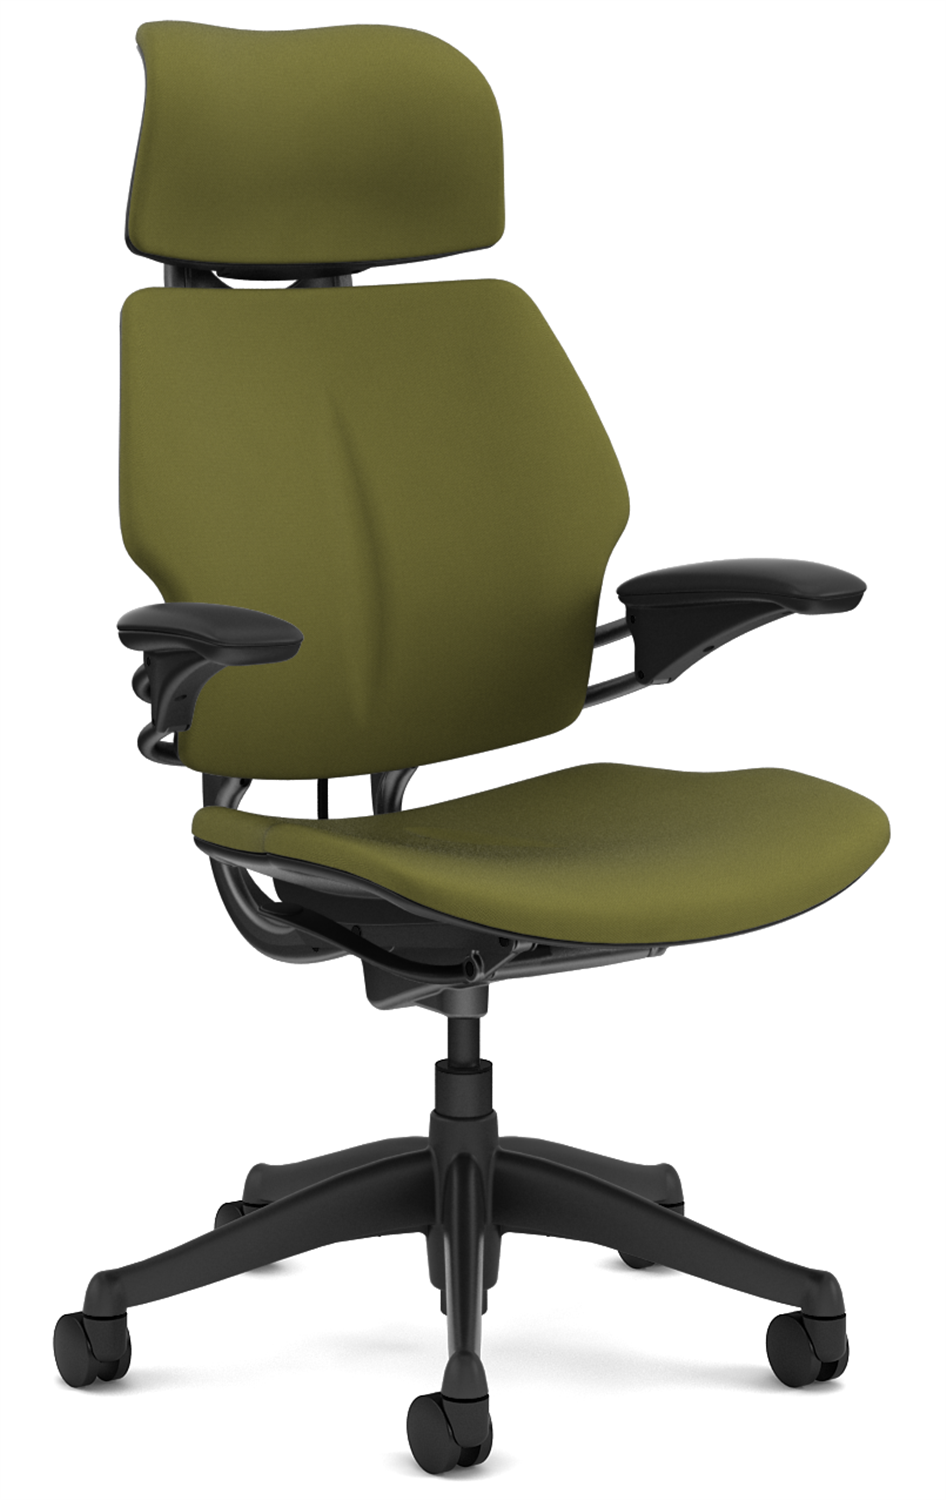 Humanscale Chairs | Graphite Freedom Chair